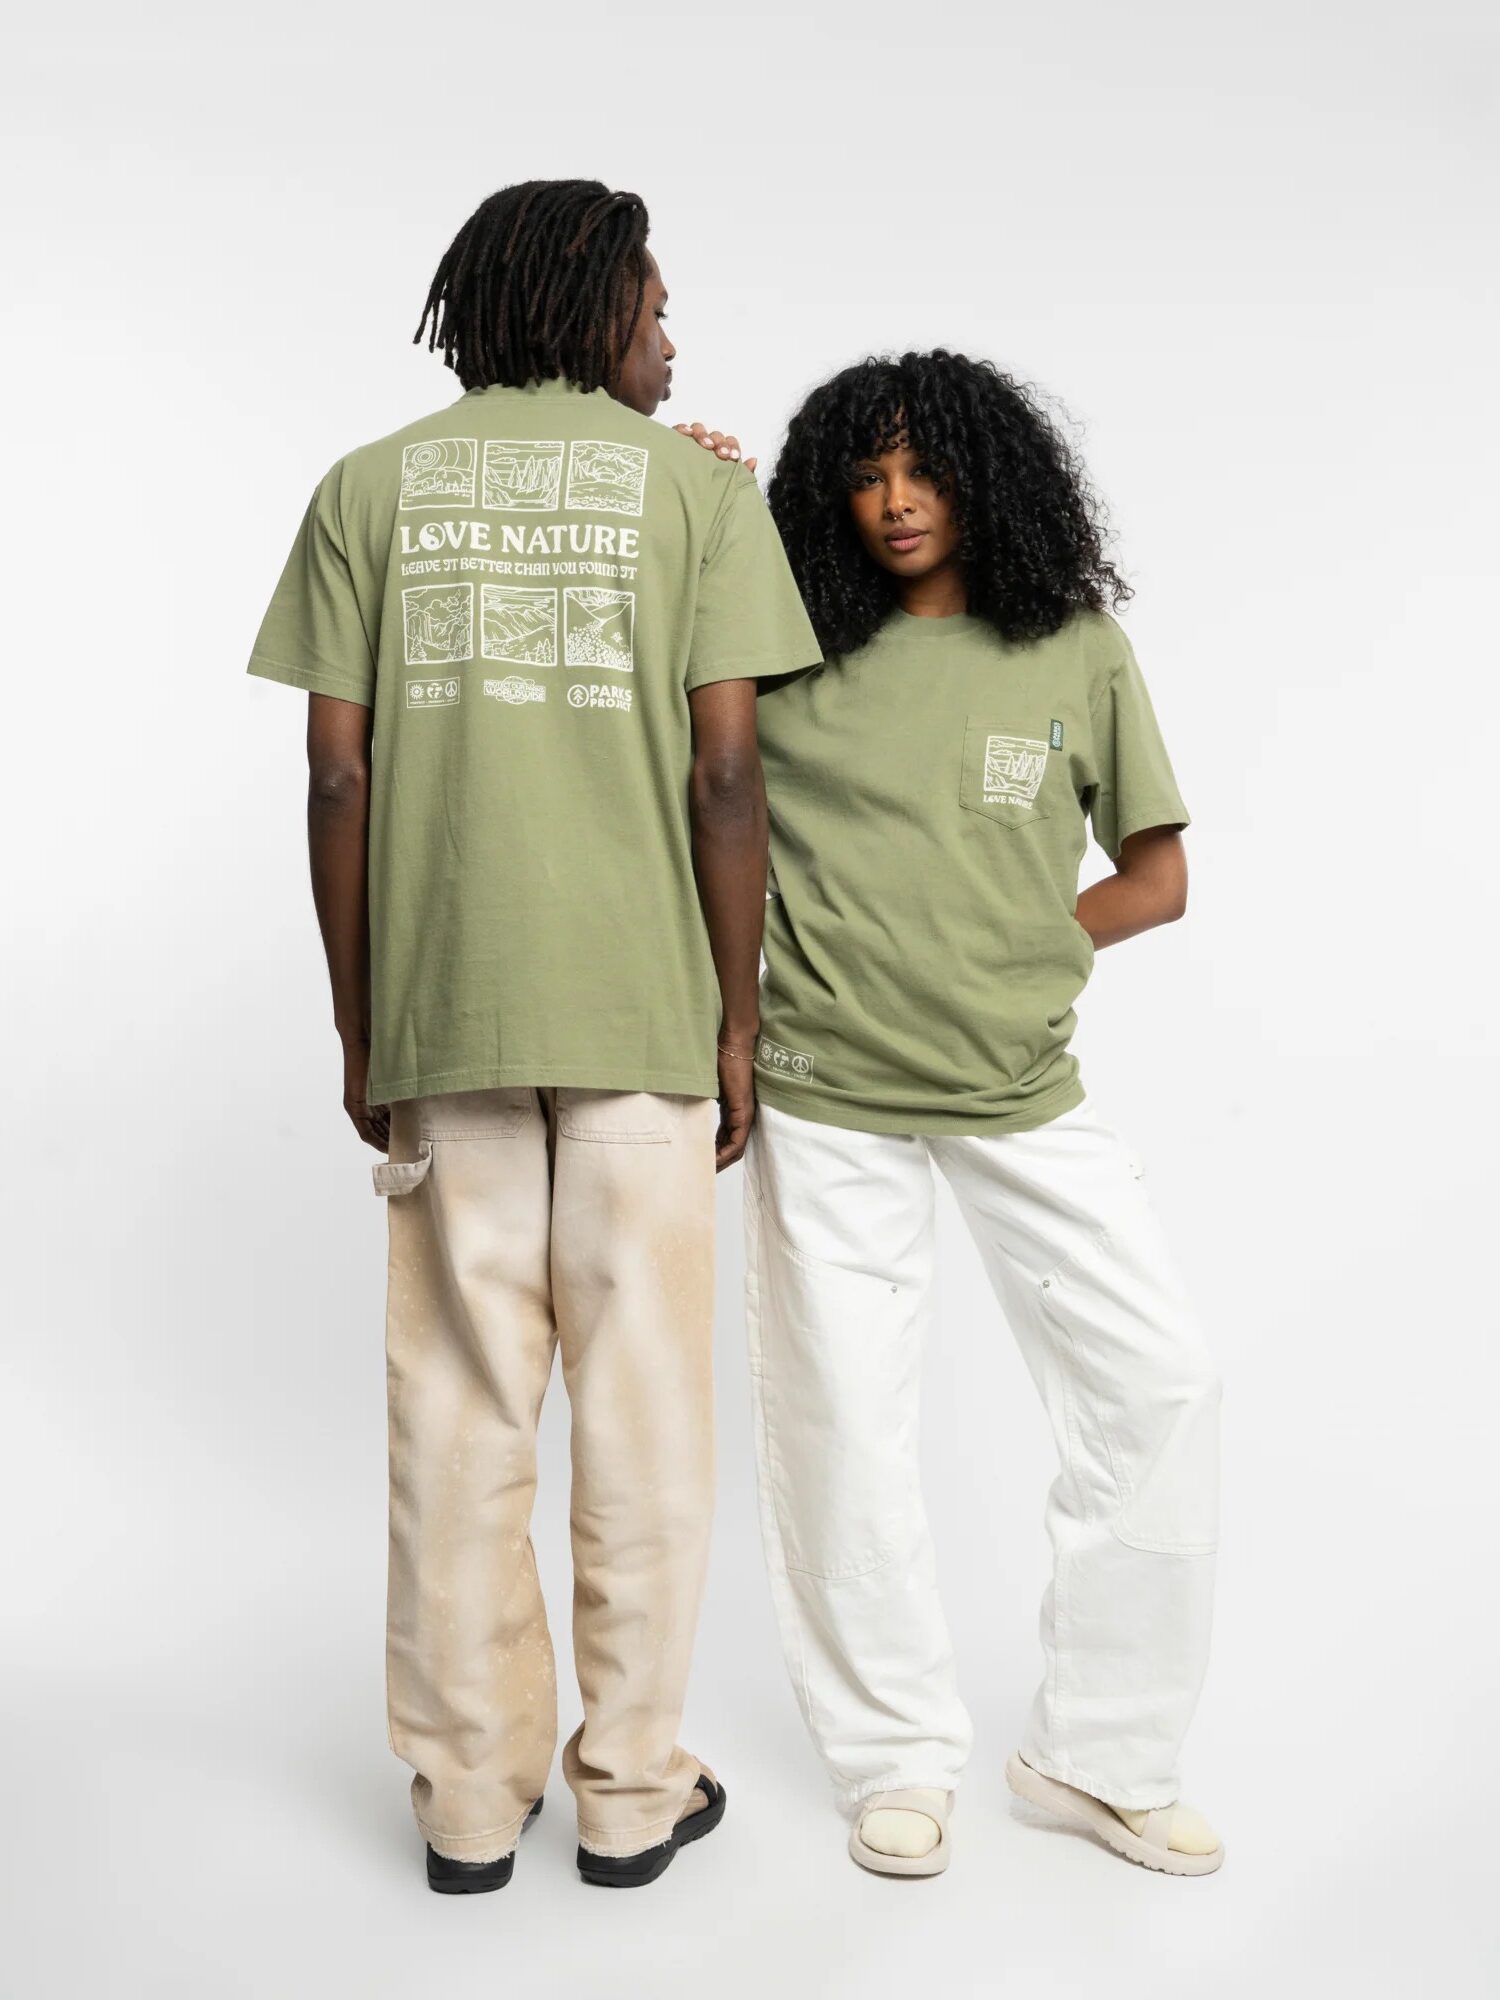 Two people, one man and one woman, stand back-to-back wearing green t-shirts with environmental slogans. the man is in beige pants, the woman in white, both facing away from the camera.